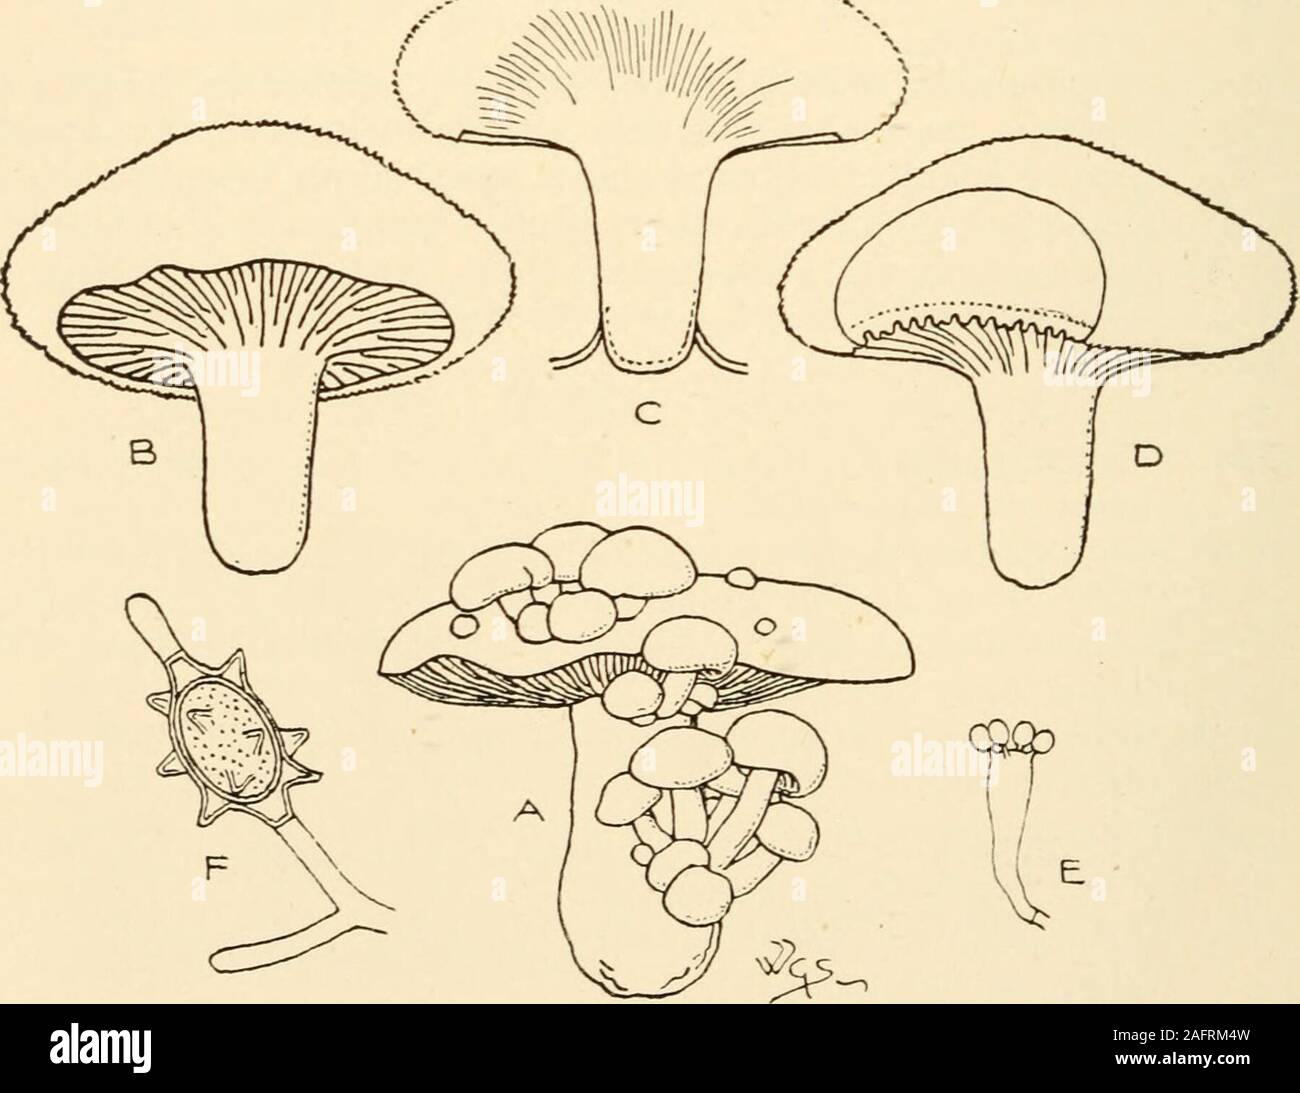 . Synopsis of the British Basidiomycetes ; a descriptive catalogue of the drawings and specimens in the Department of botany, British museum. ^ X /, ii in. 298 AGARICACE/E Cantharelhis c. ResupinatcE. 1387. C. retirugus Pers. (from the reticulate gills; rete, a net, ruga, a wrinkle) a b c. P. sessile, inferior, membranous, irregular, repando-lobed, cinereous-fuliginous, or pale fuliginous over biscuit G. superior, radiating from a central or lateral point, whitish-fuliginous or paler than P. On sticks and mosses in bogs, Hypnum; uncommon. April-May.P. f in. in diam. Sometimes wholly salmon or Stock Photo